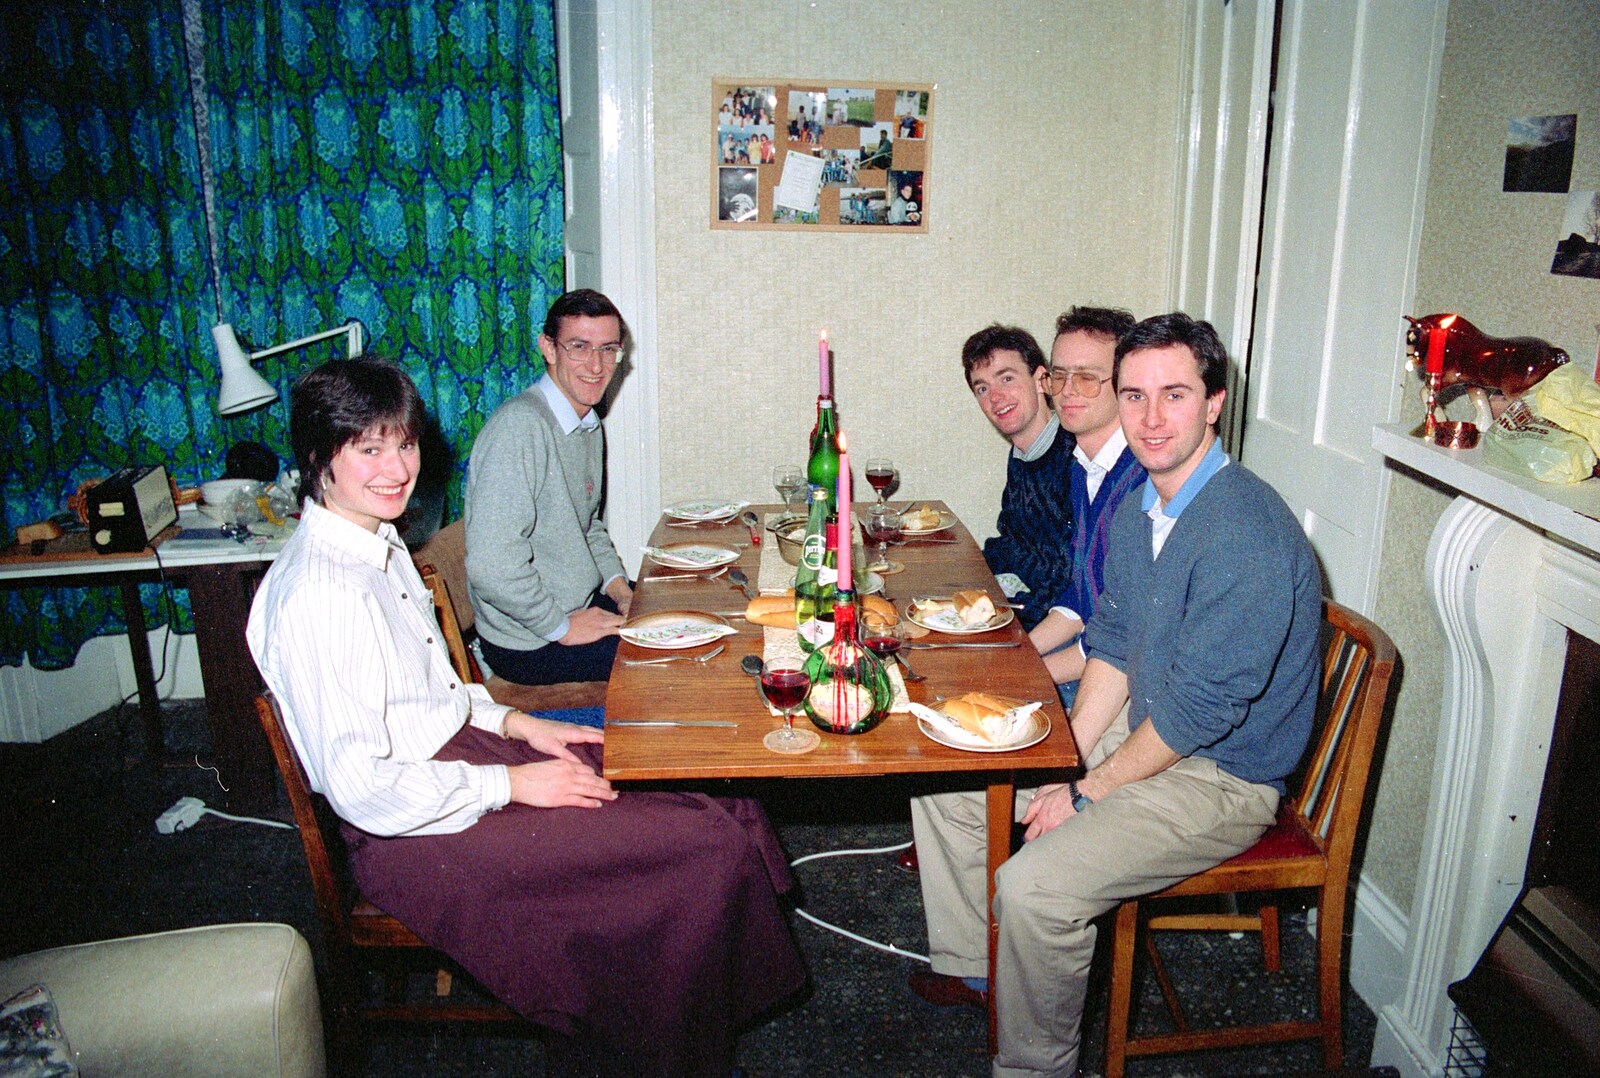 The dinner party from Uni: A Dinner Party, Harbertonford and Buckfastleigh, Devon - 24th December 1988